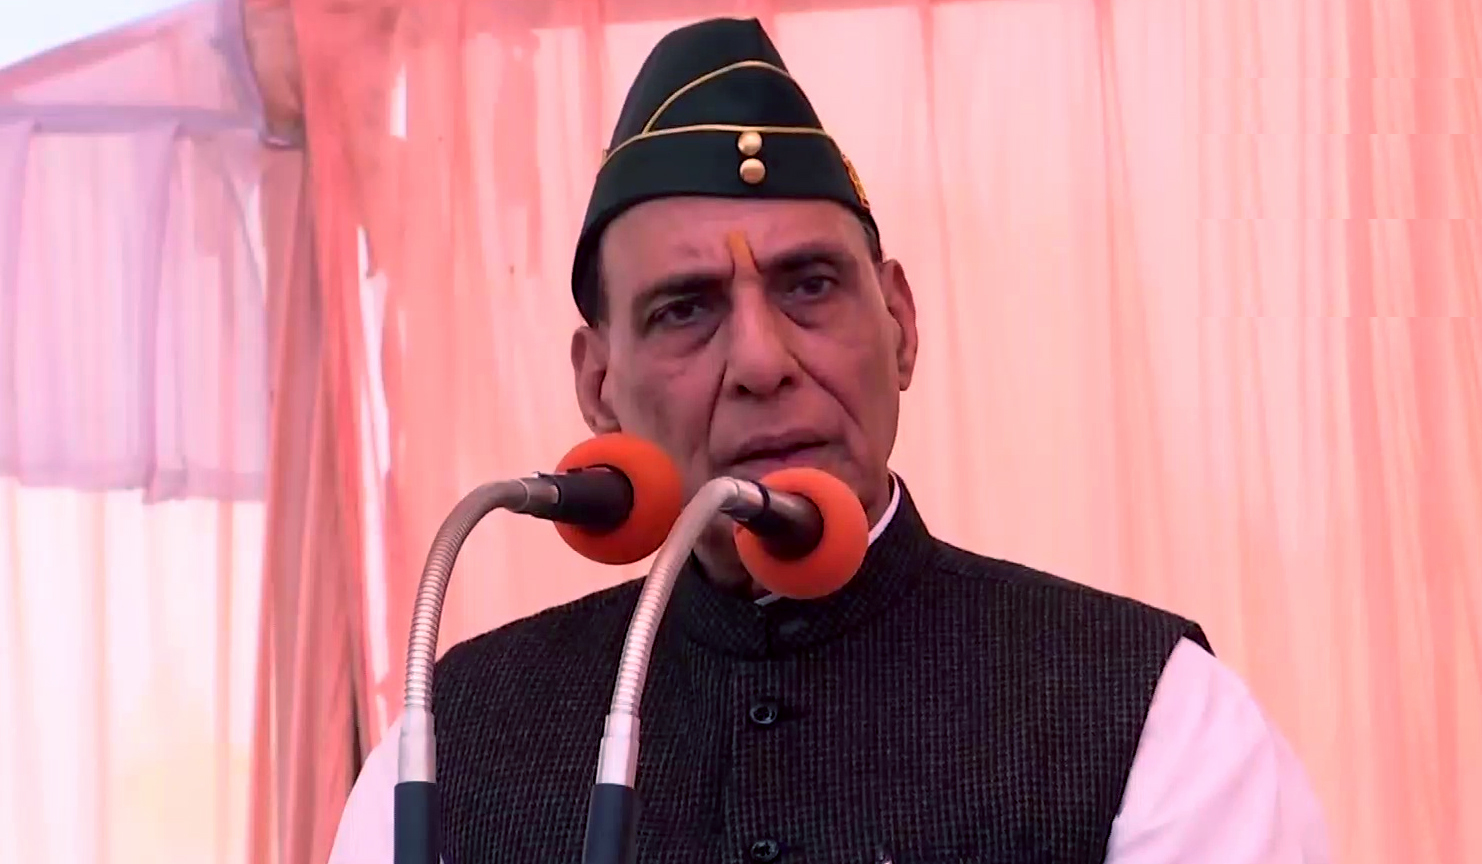 Clear With Our Policy on National Security: Defence Minister Rajnath Singh